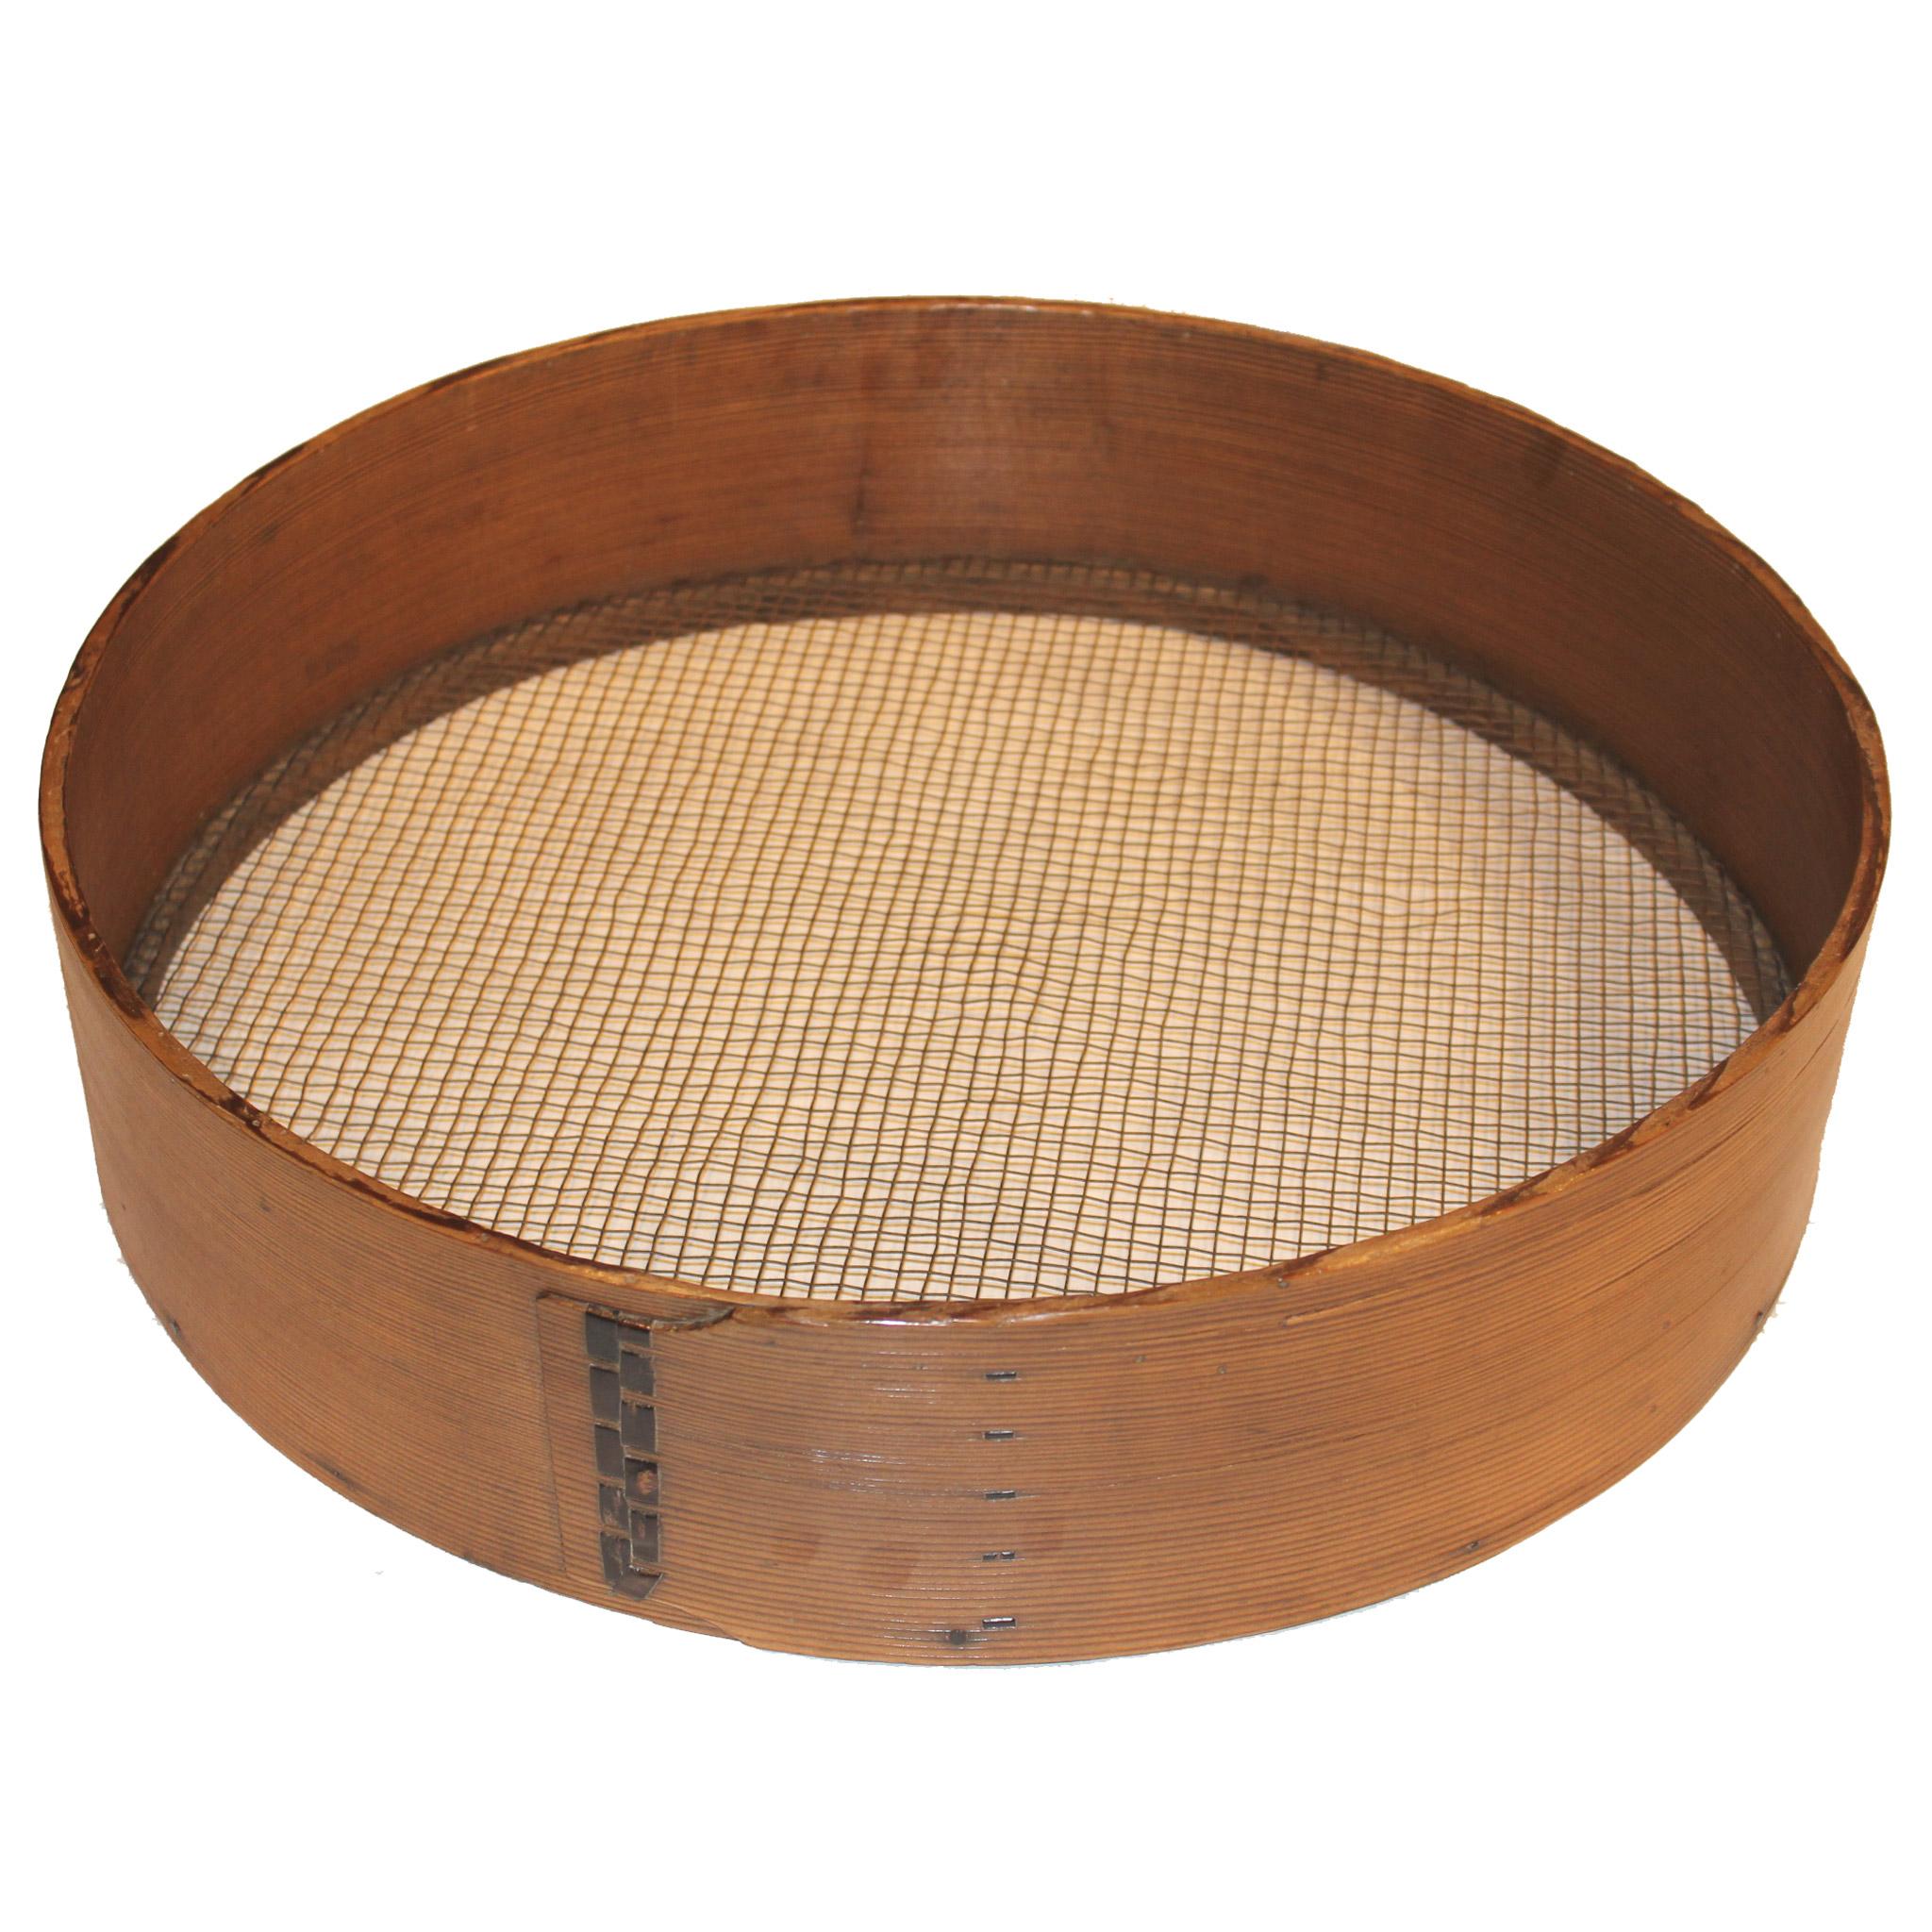 Vintage northern Japanese Taisho period grain sorting basket. Basket can be utilized as a container for flowers or accessories or hung on a wall. Kiri wood with bamboo accents and wire mesh.